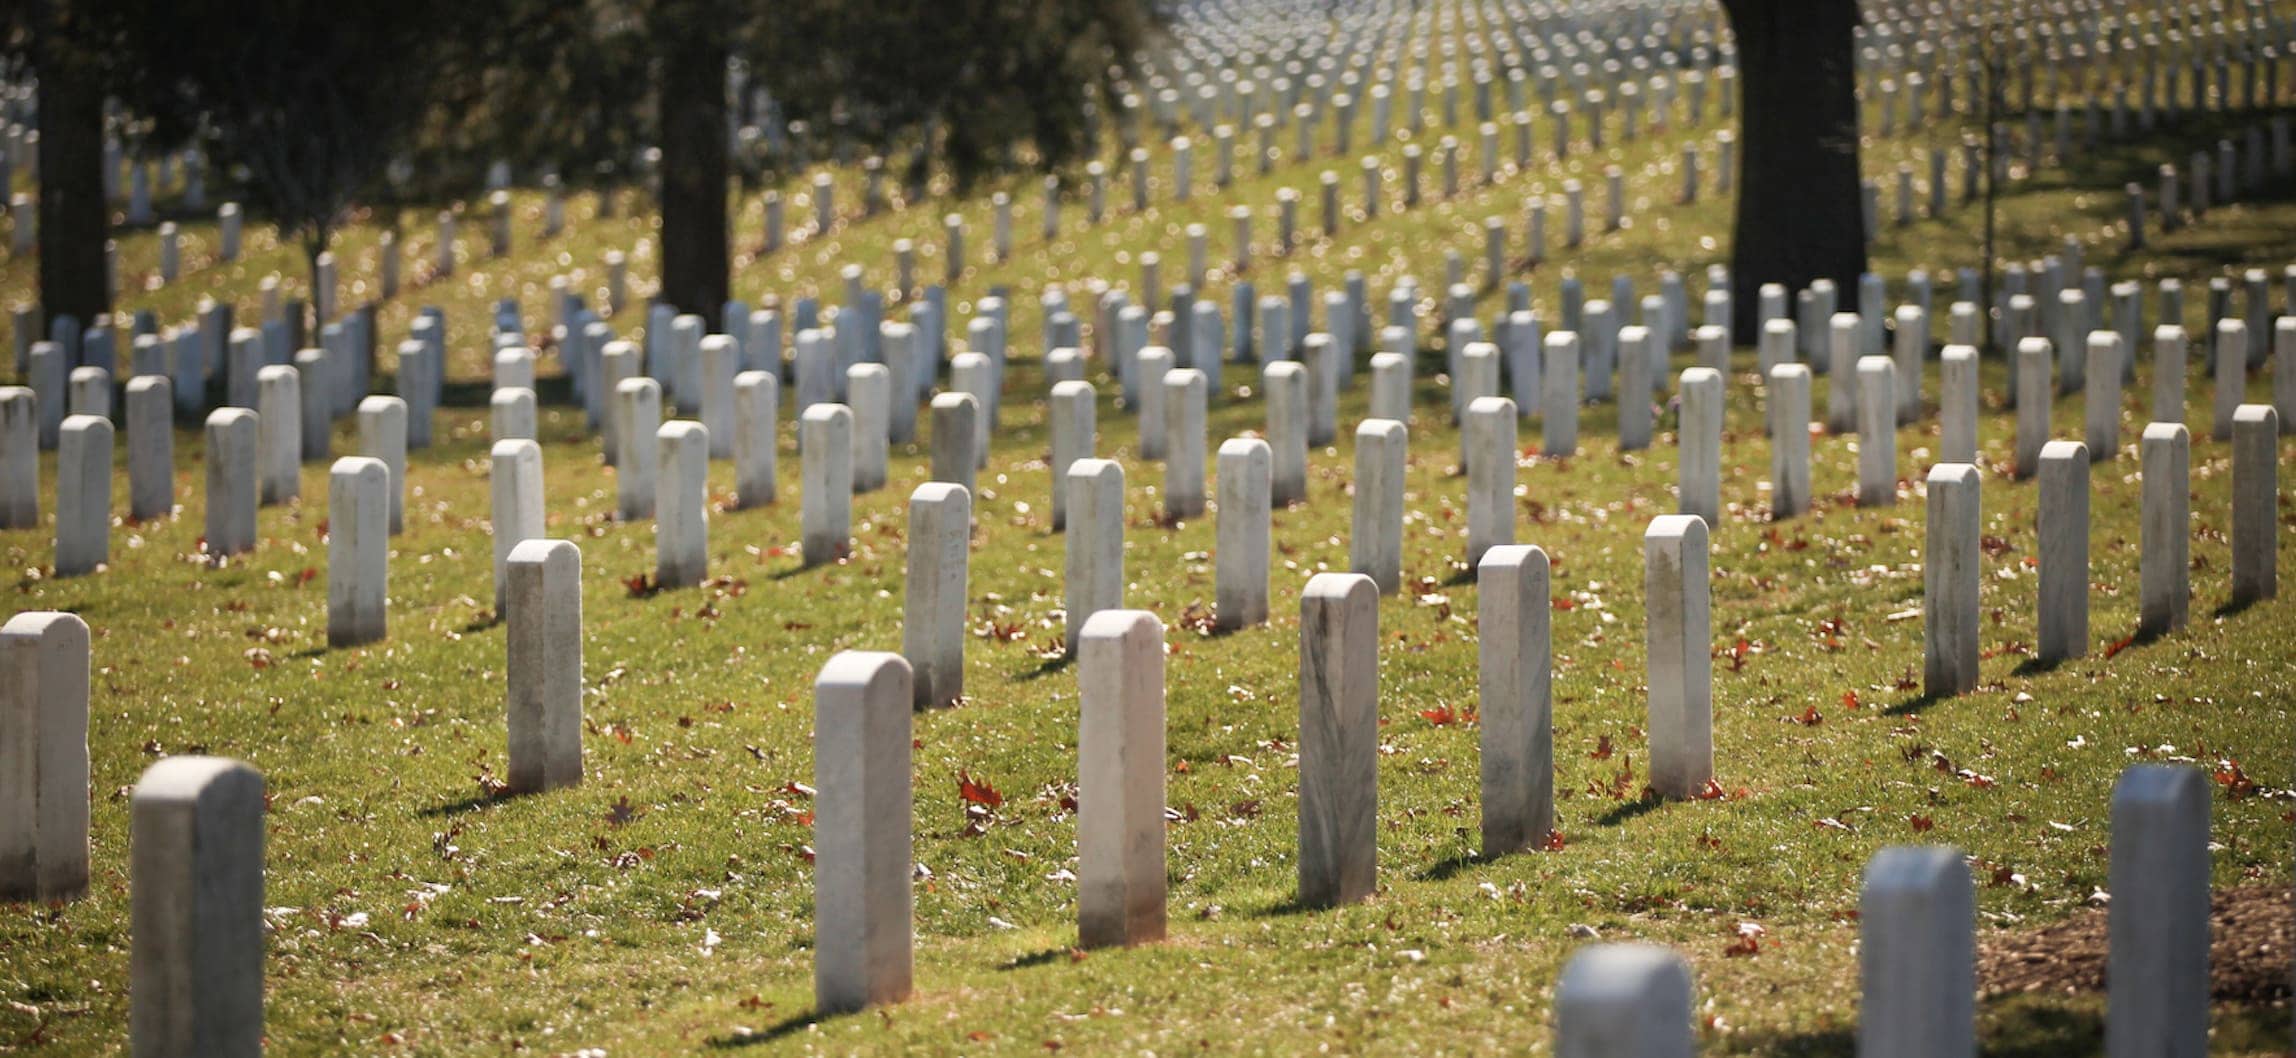 Arlington National Cemetery is the final resting place for thousands of American military members. Photo: Evan Bambrick